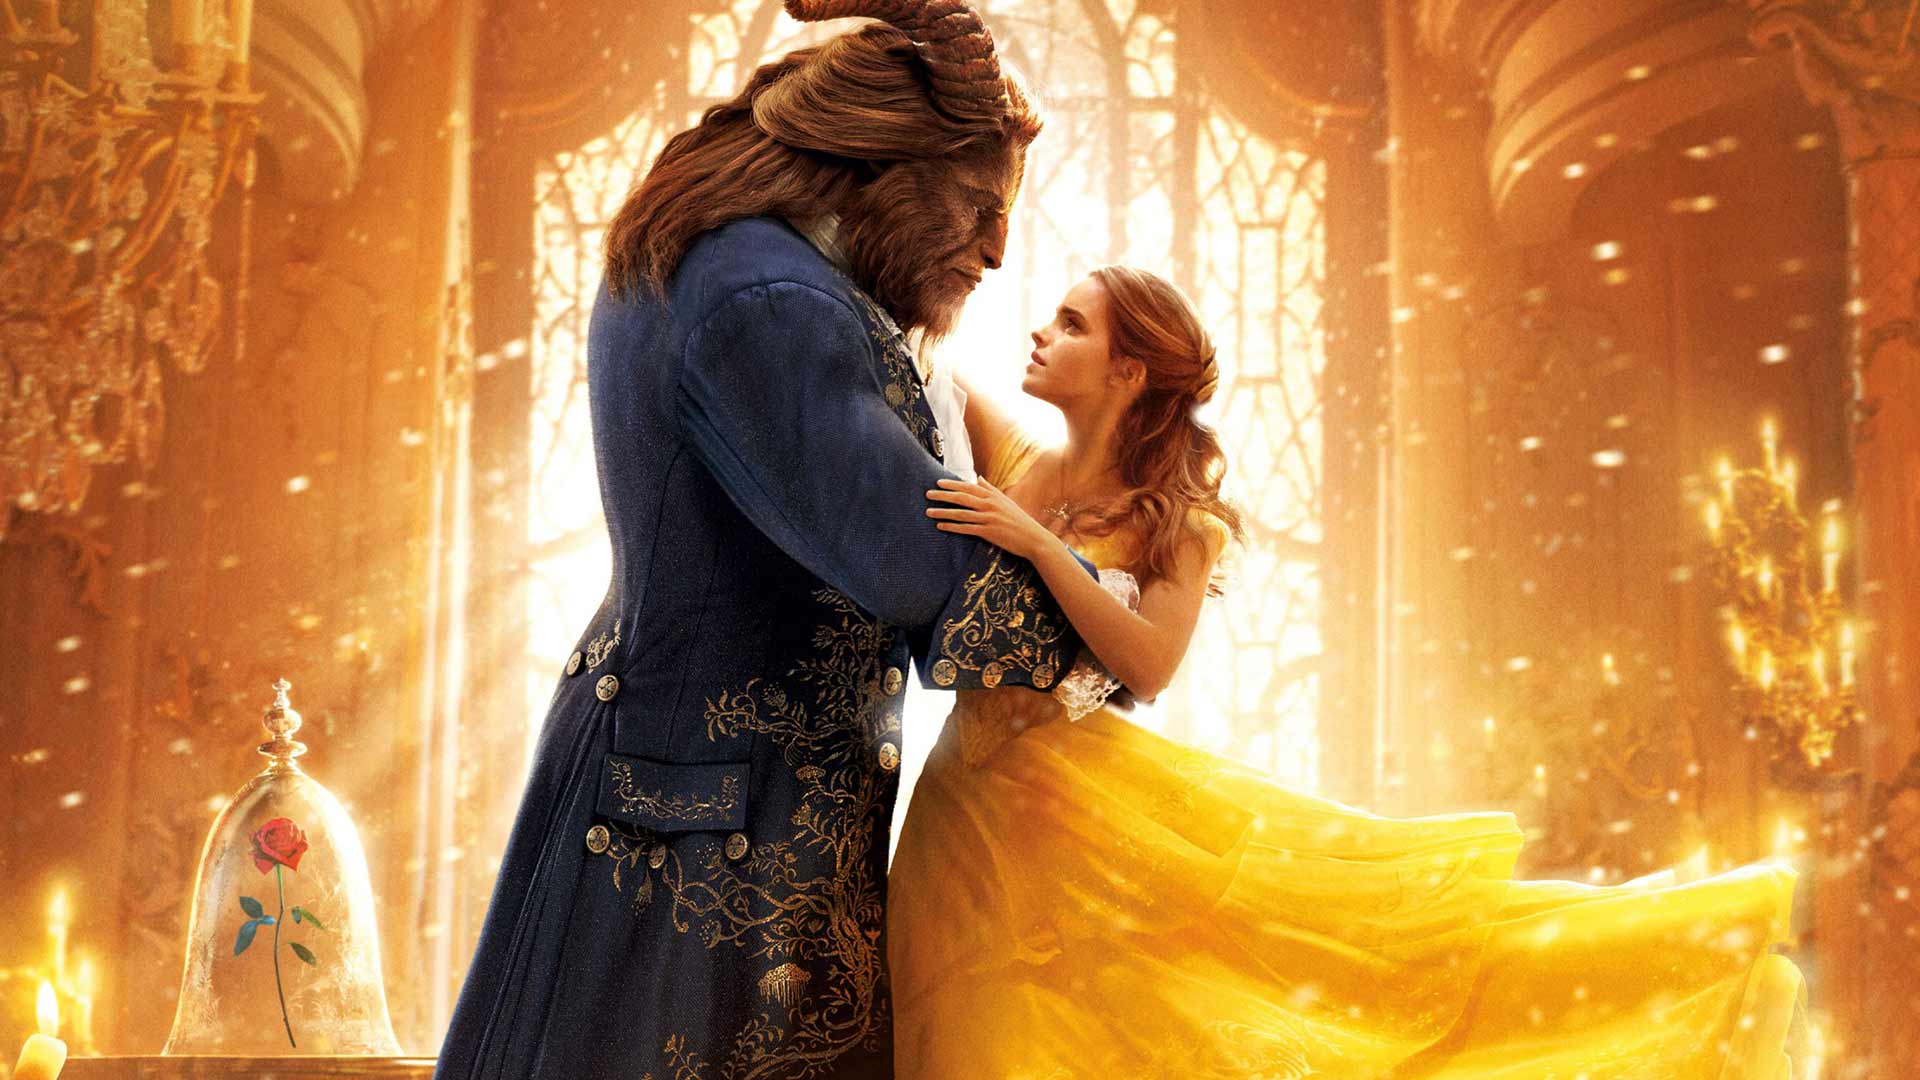 Emma Watson and Dan Stevens as Beast and Belle in Disney's live action Beauty and the Beast